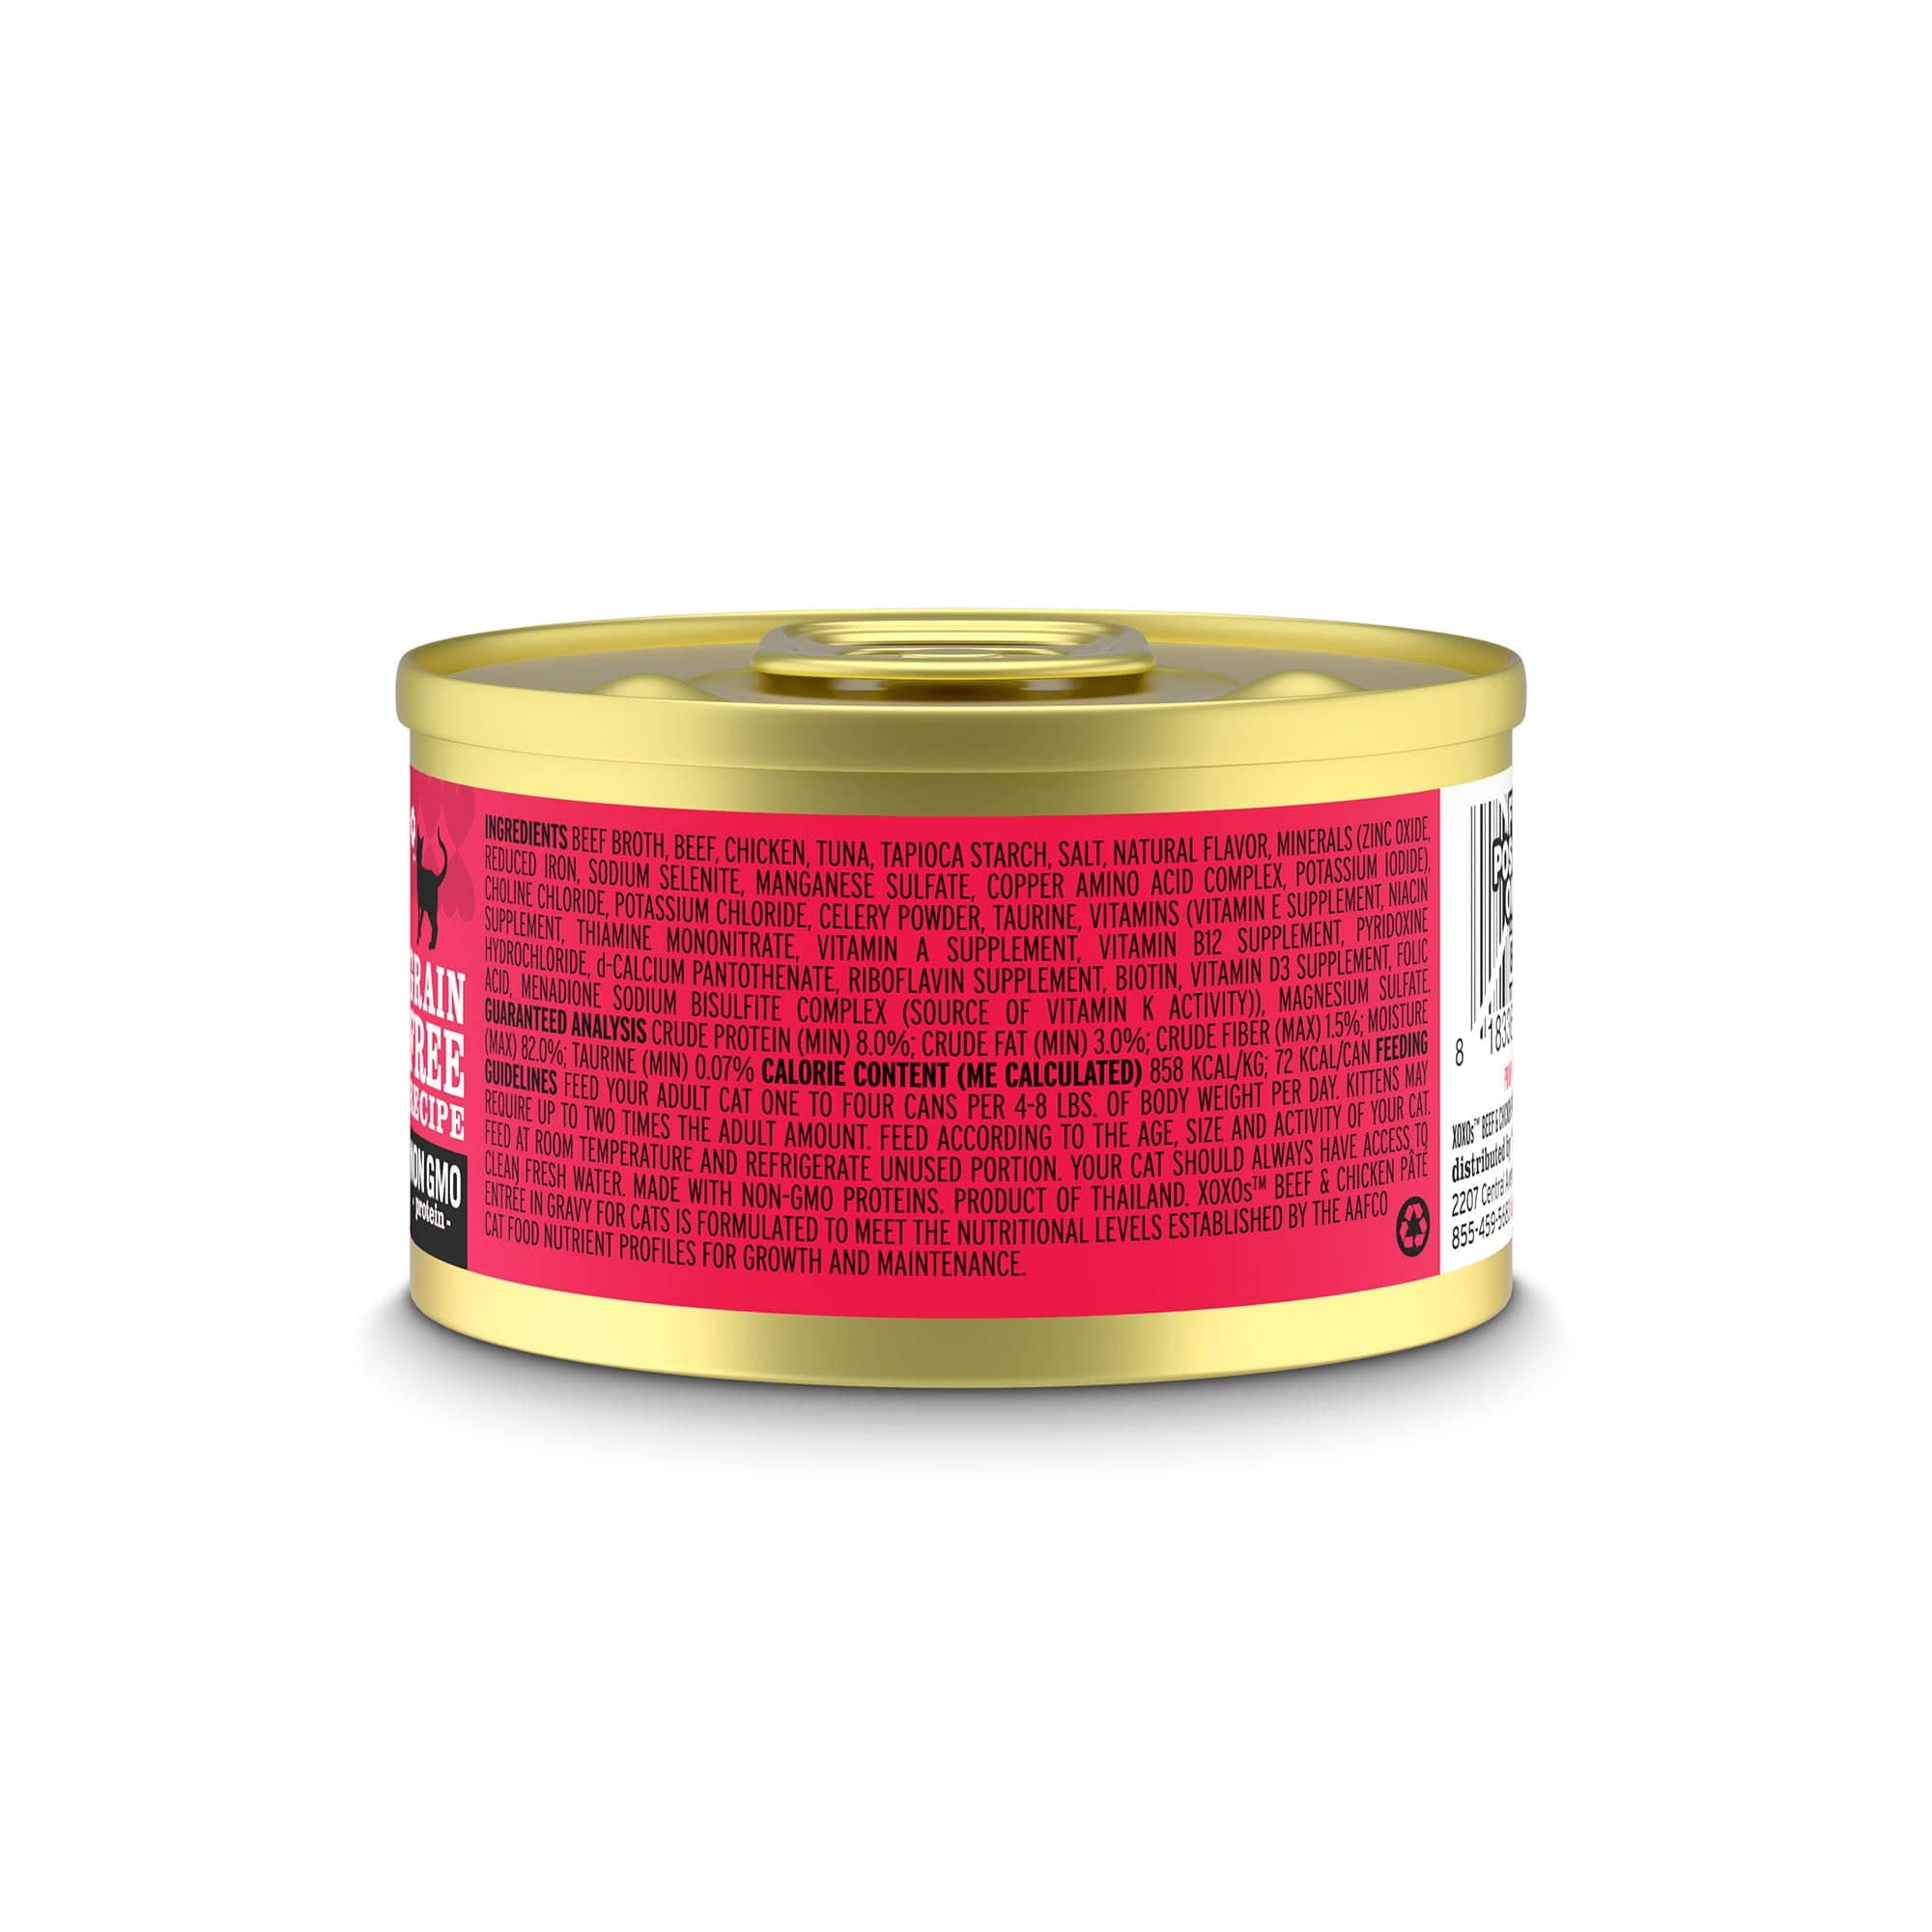 XOXOs Beef & Chicken Pate, a can of savory gourmet cat food with two protein varieties.